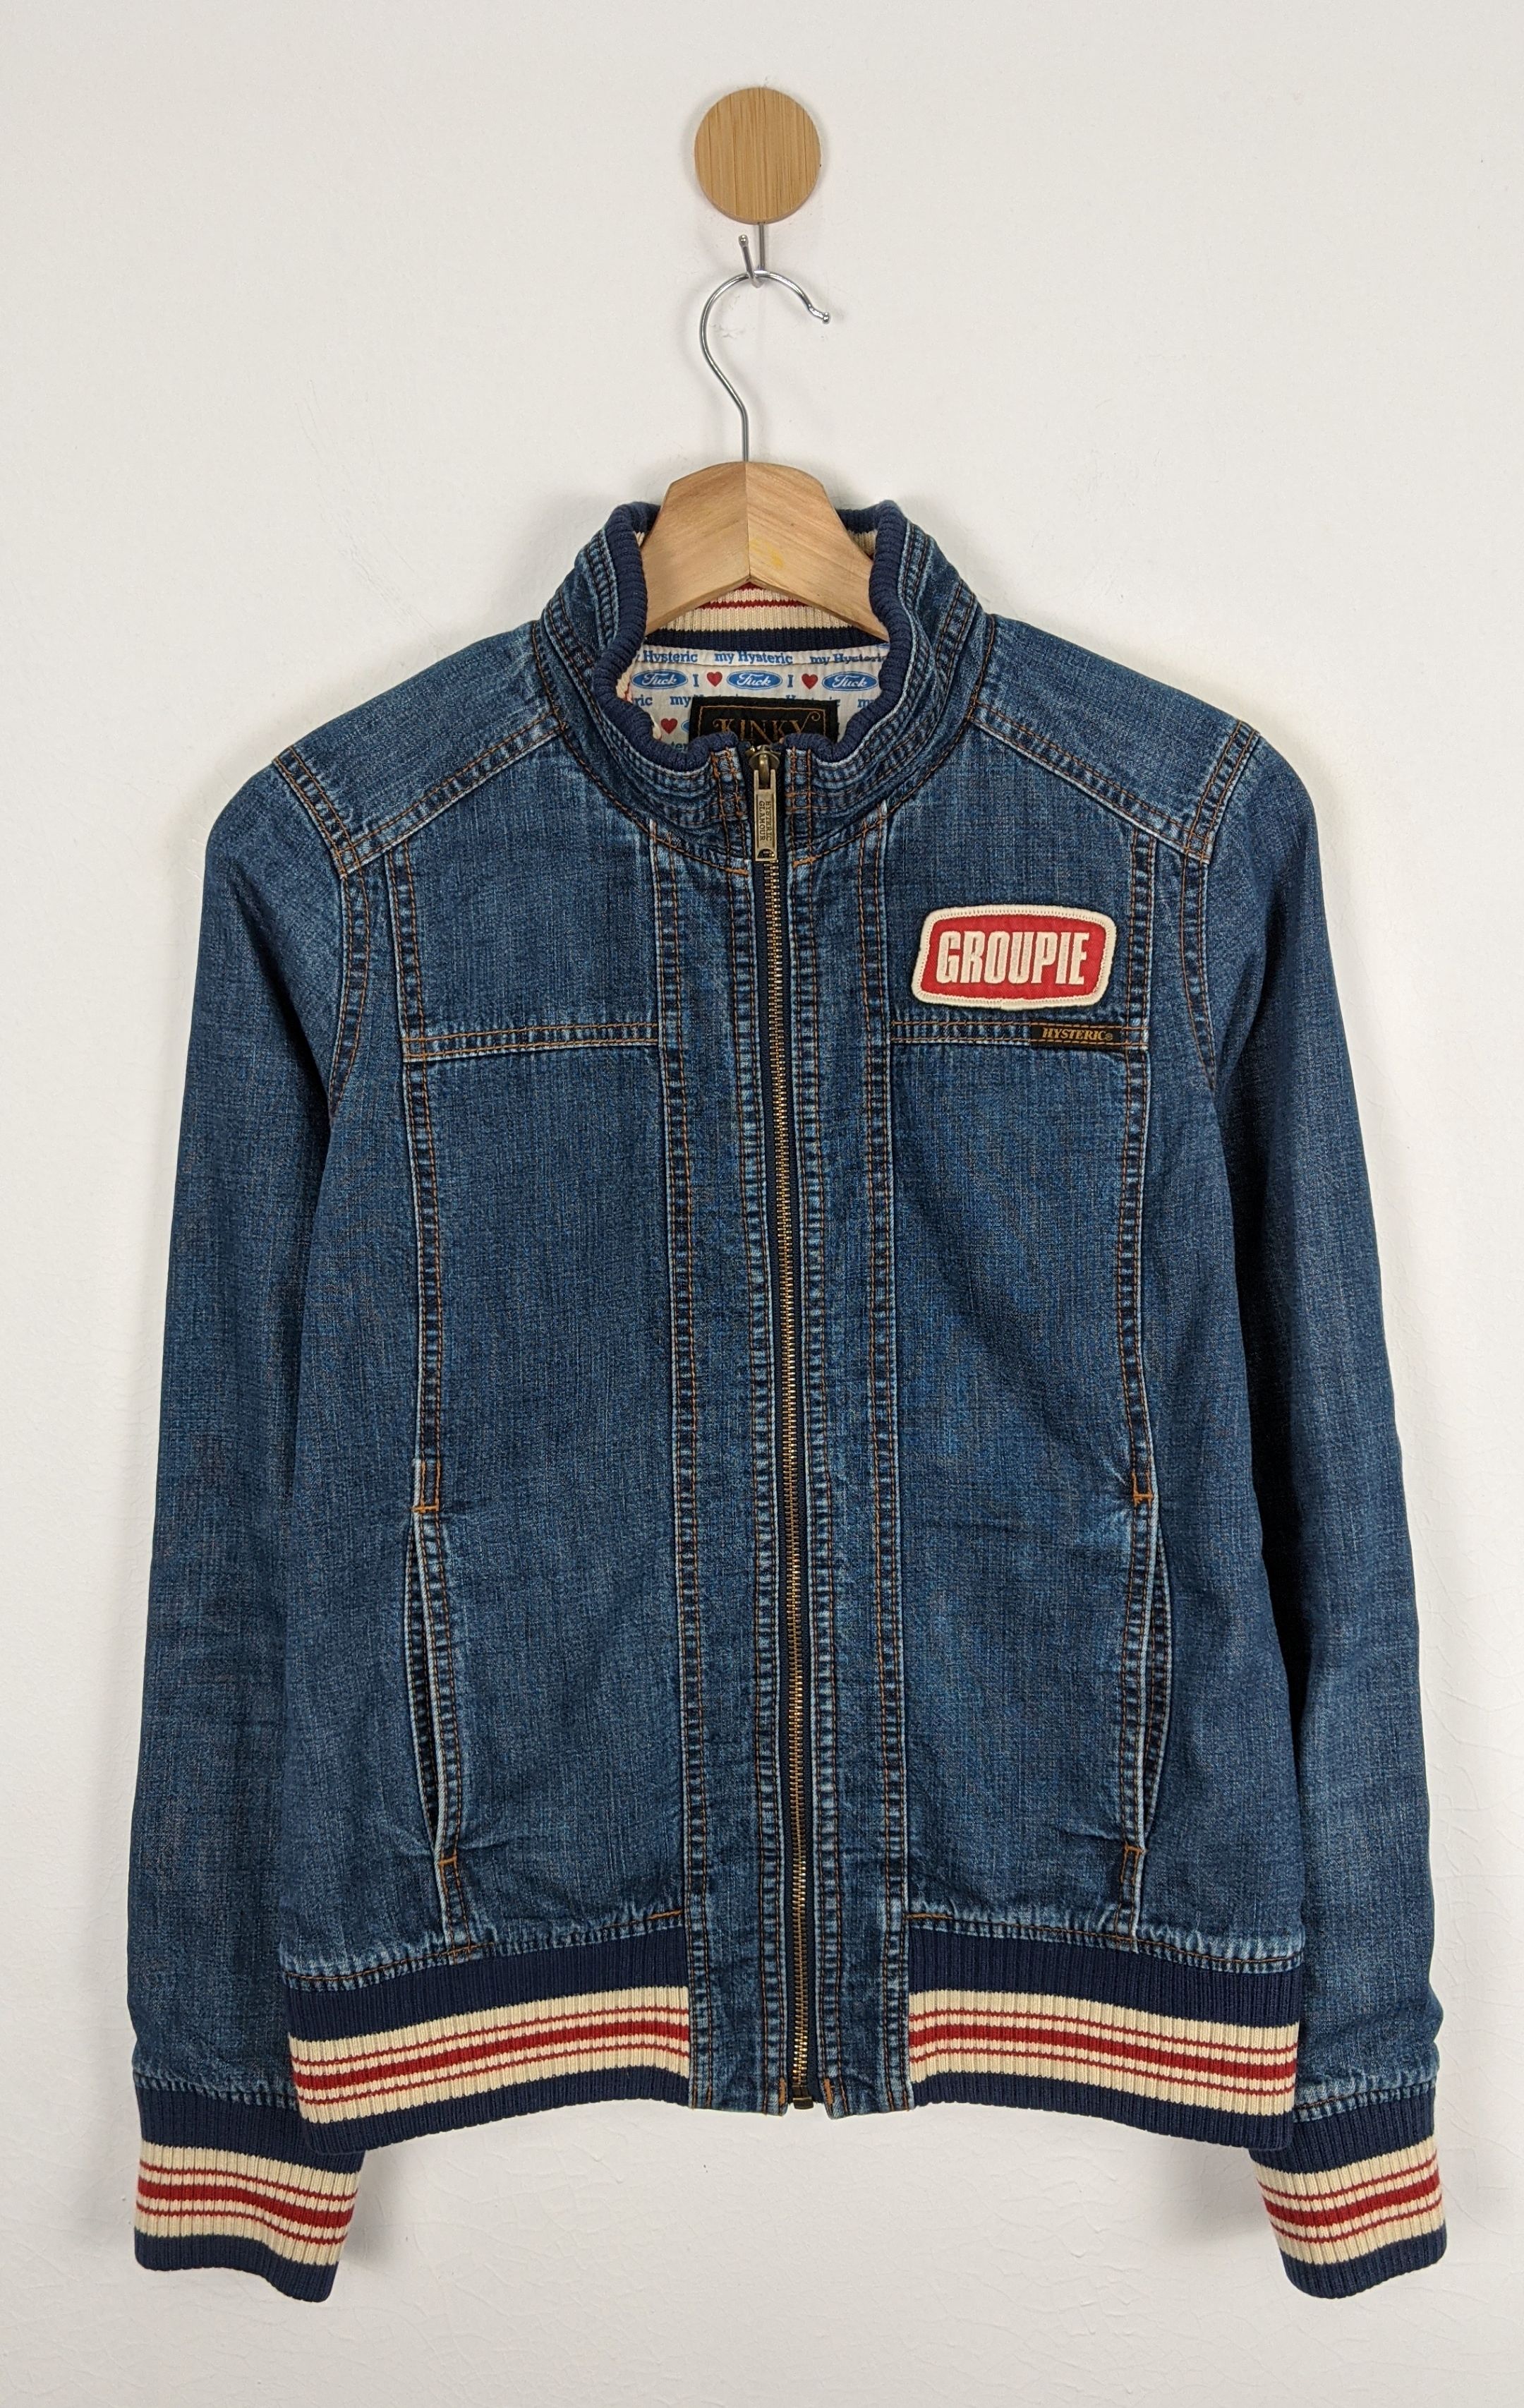 Hysteric Glamour Hysteric Glamour Kinky Denim Groupie Jeans Jacket Size US S / EU 44-46 / 1 - 1 Preview